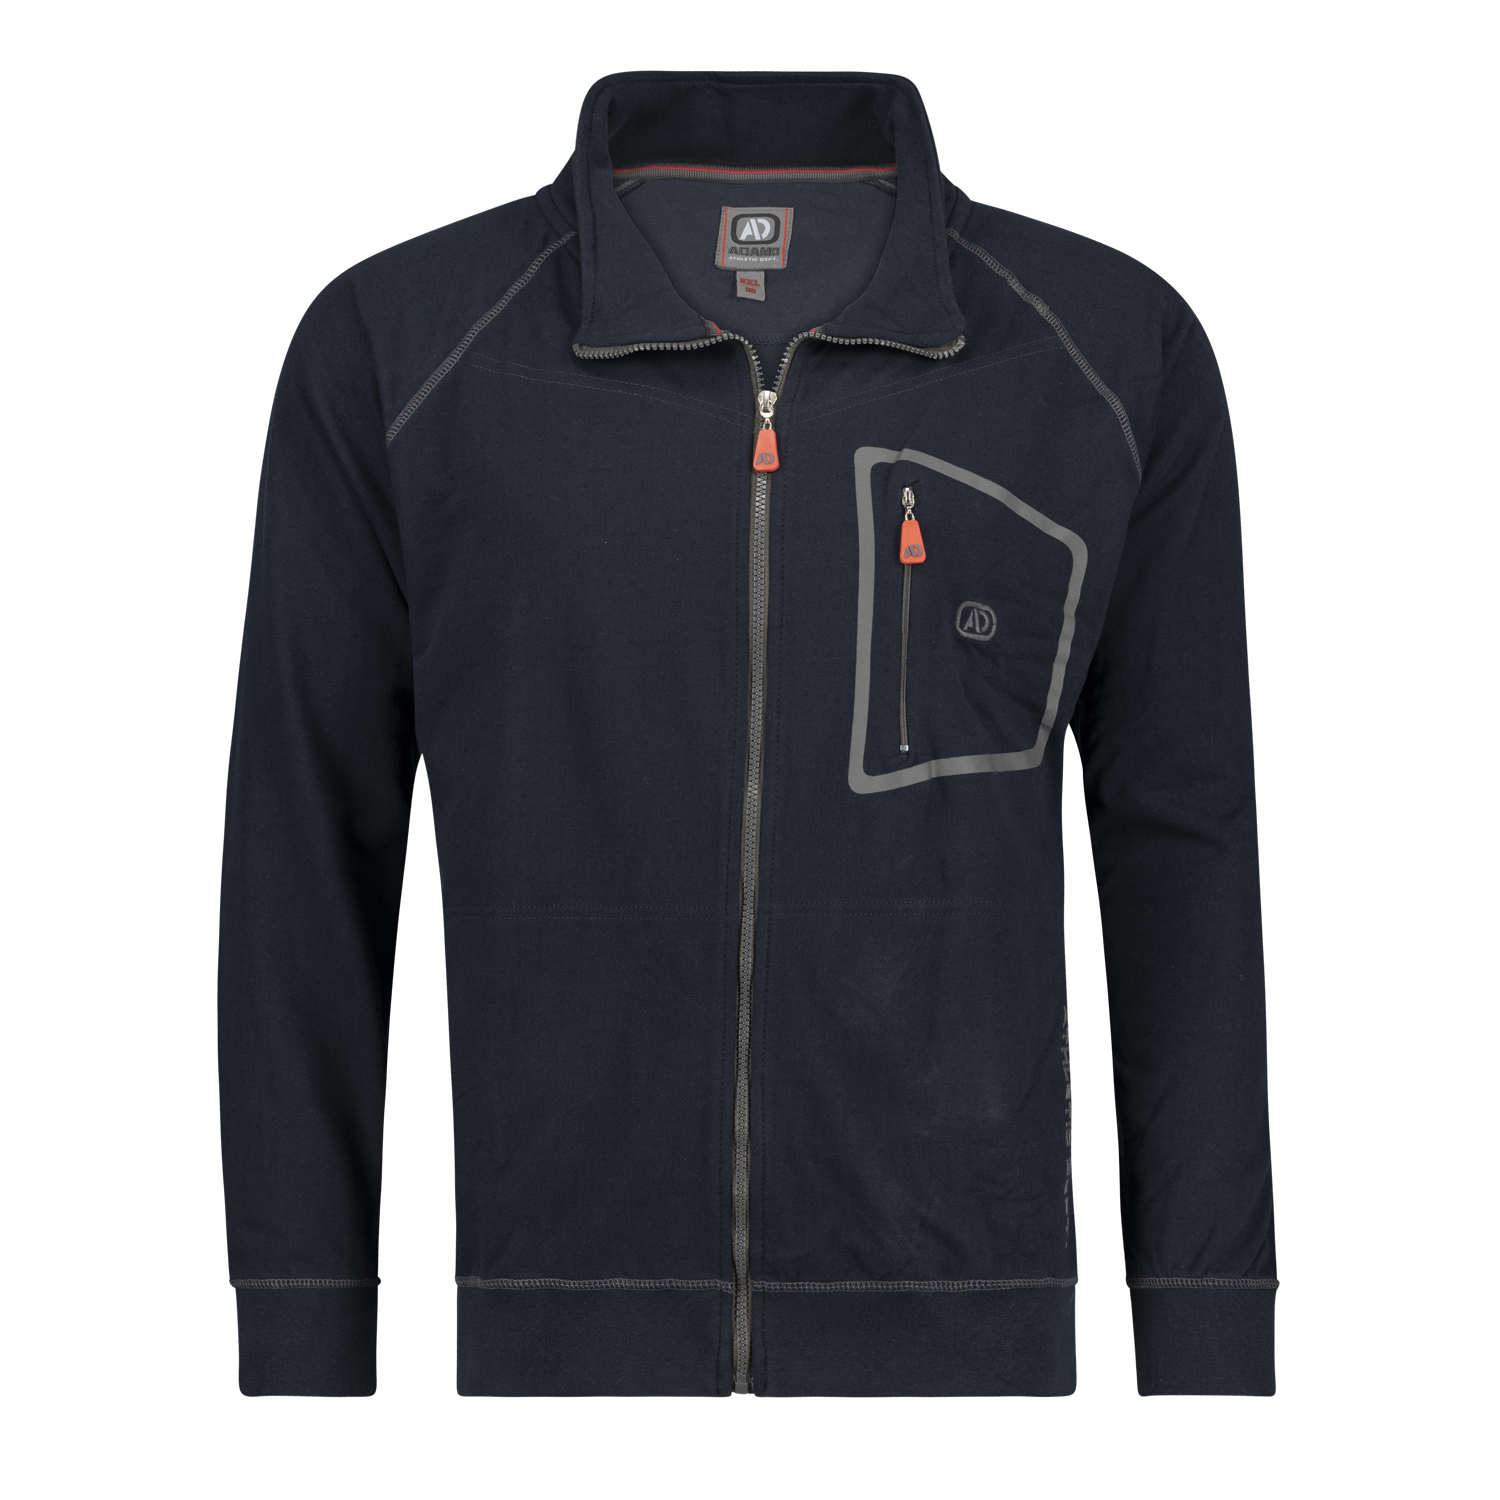 Sweatjacket "Manuel" for men by Adamo in navy oversizes up to 14XL